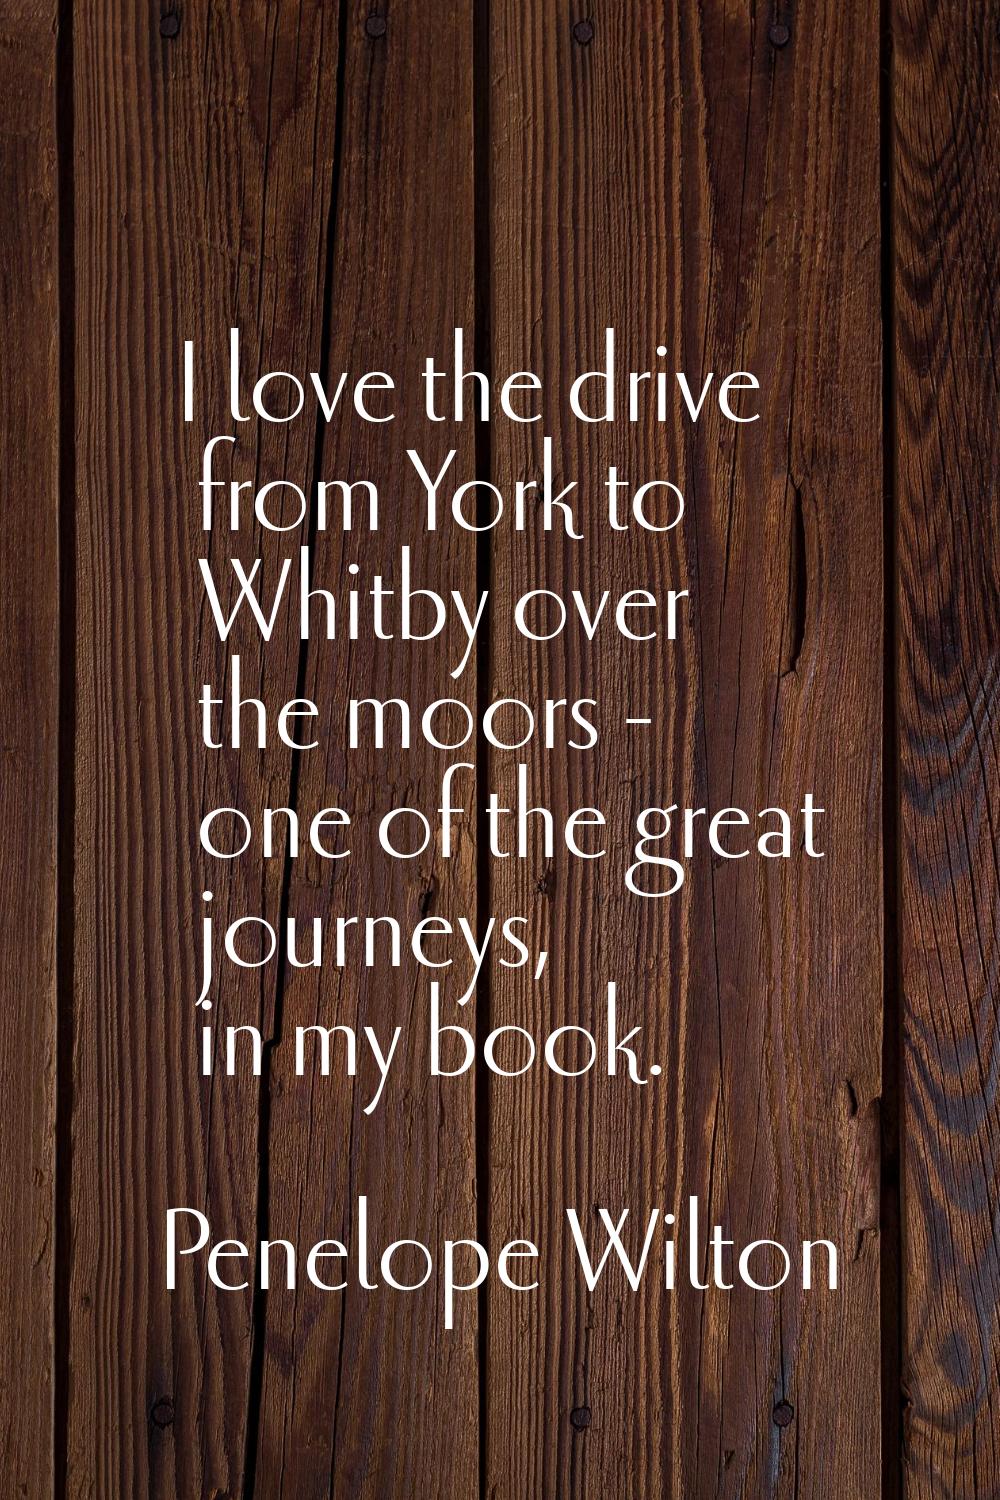 I love the drive from York to Whitby over the moors - one of the great journeys, in my book.